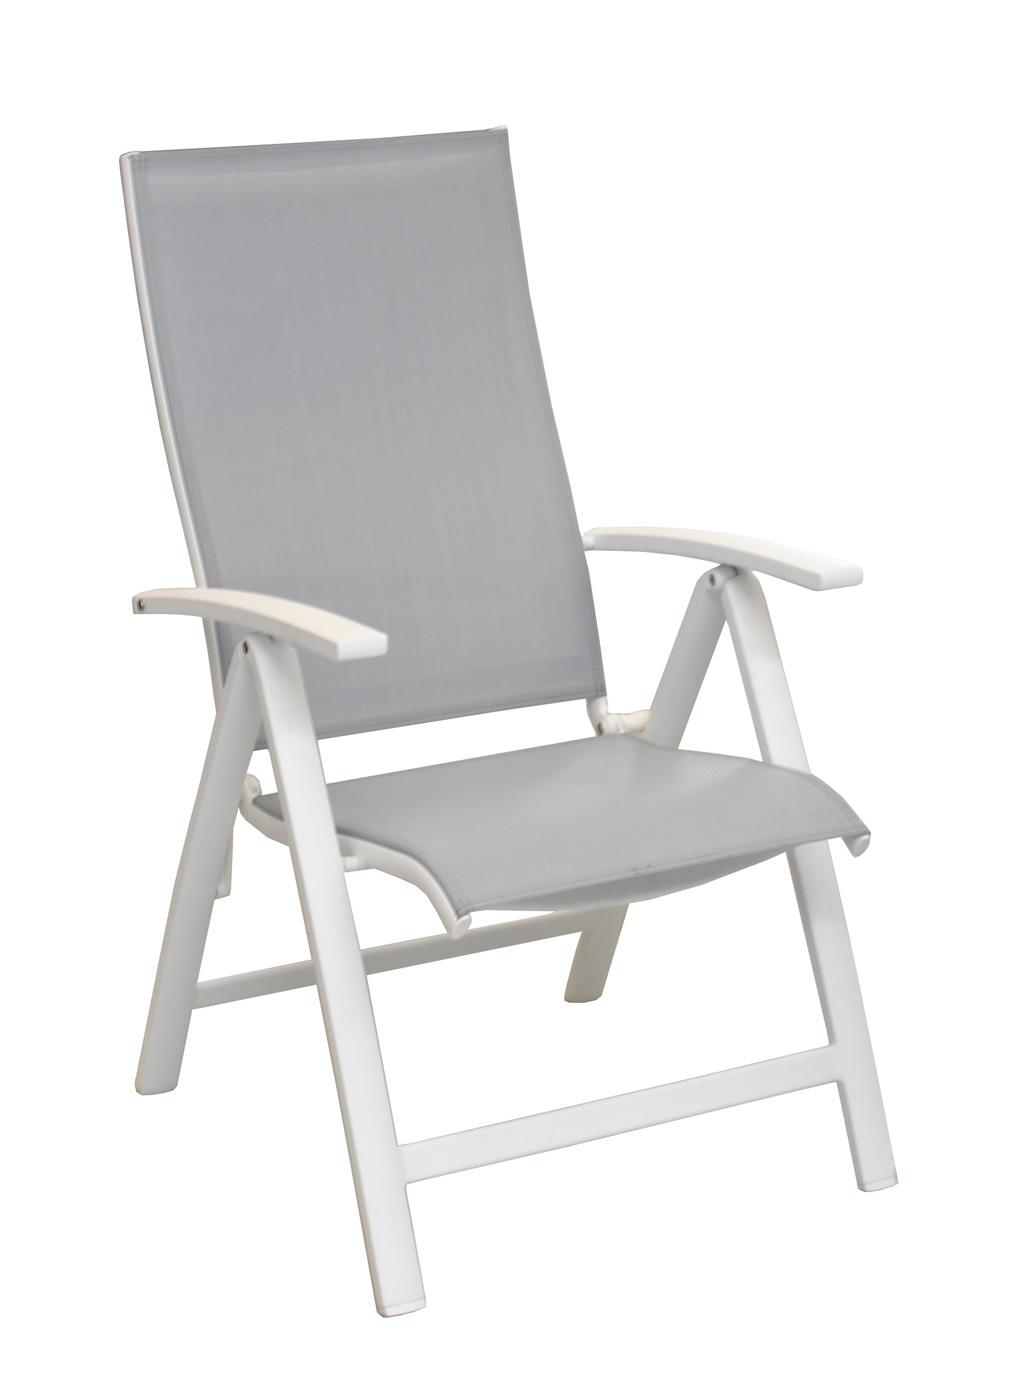 Fauteuil Elegance OCEO multipo blanc-s-gris